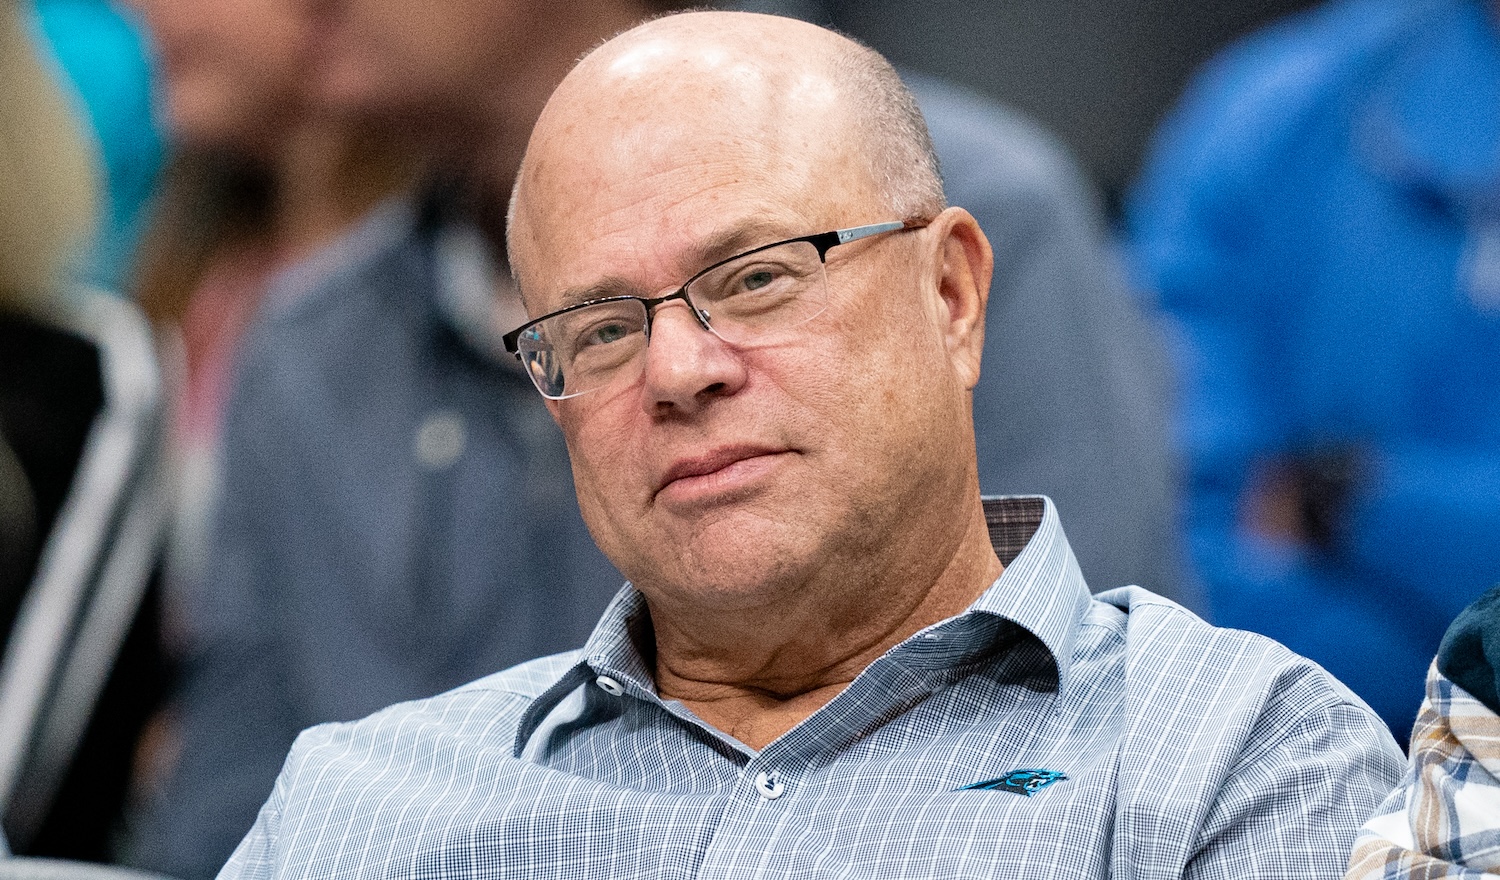 CHARLOTTE, NORTH CAROLINA - MARCH 21: David Tepper looks on in the second quarter during the game between the Charlotte Hornets and the New Orleans Pelicans at Spectrum Center on March 21, 2022 in Charlotte, North Carolina. NOTE TO USER: User expressly acknowledges and agrees that, by downloading and or using this photograph, User is consenting to the terms and conditions of the Getty Images License Agreement. (Photo by Jacob Kupferman/Getty Images)